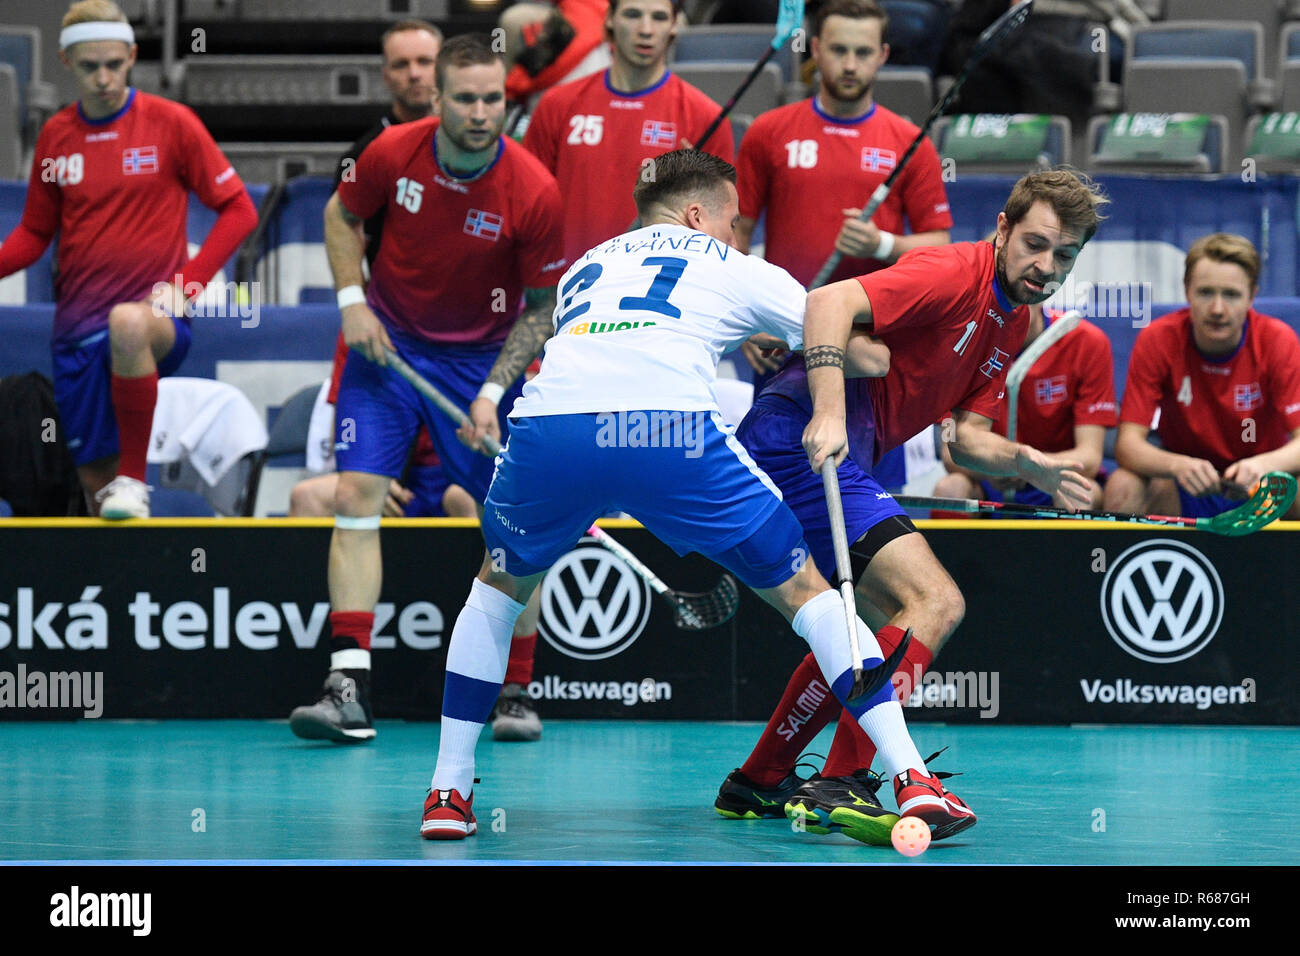 Prague, Czech Republic. 04th Dec, 2018. From right ANDREAS NAESS VALBYE of Norway and TATU VAANANEN of Finland in action during the Men's World Floorball Championship, group B match Finland vs Norway, played in Prague, Czech Republic, on December 4, 2018. Credit: Michal Kamaryt/CTK Photo/Alamy Live News Stock Photo